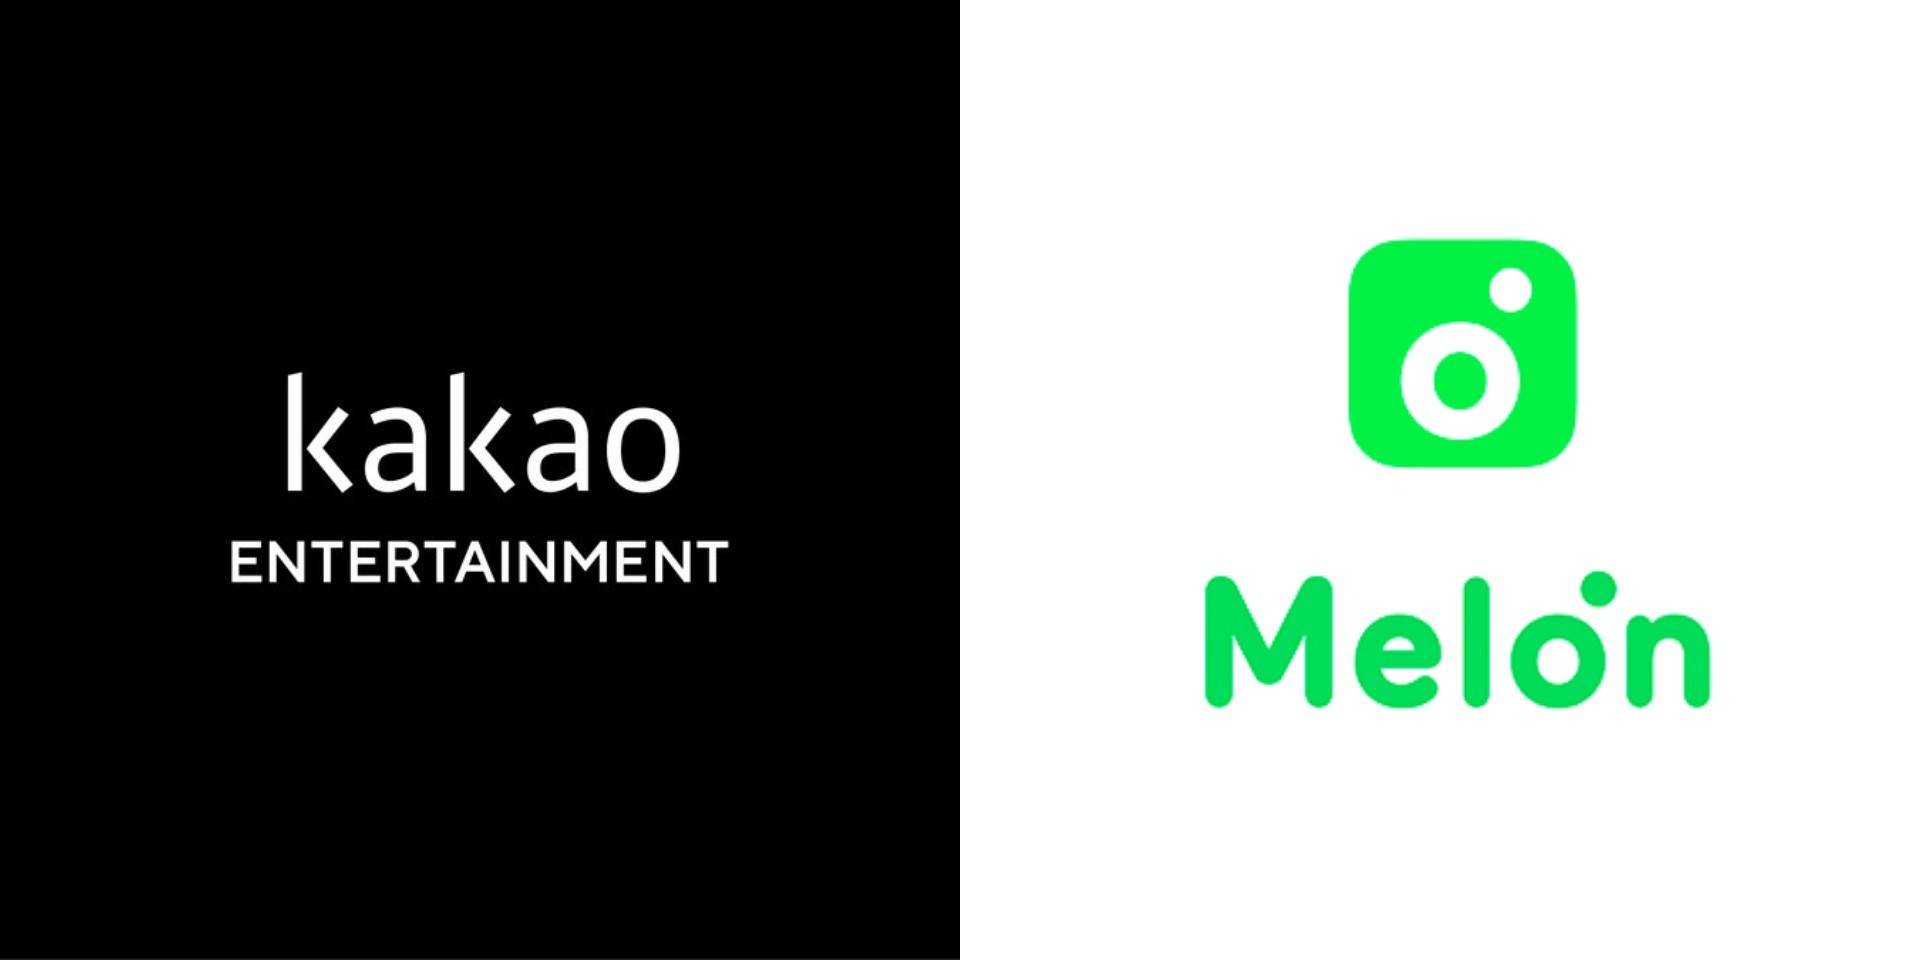 Kakao Entertainment to join forces with Melon Music Company this September